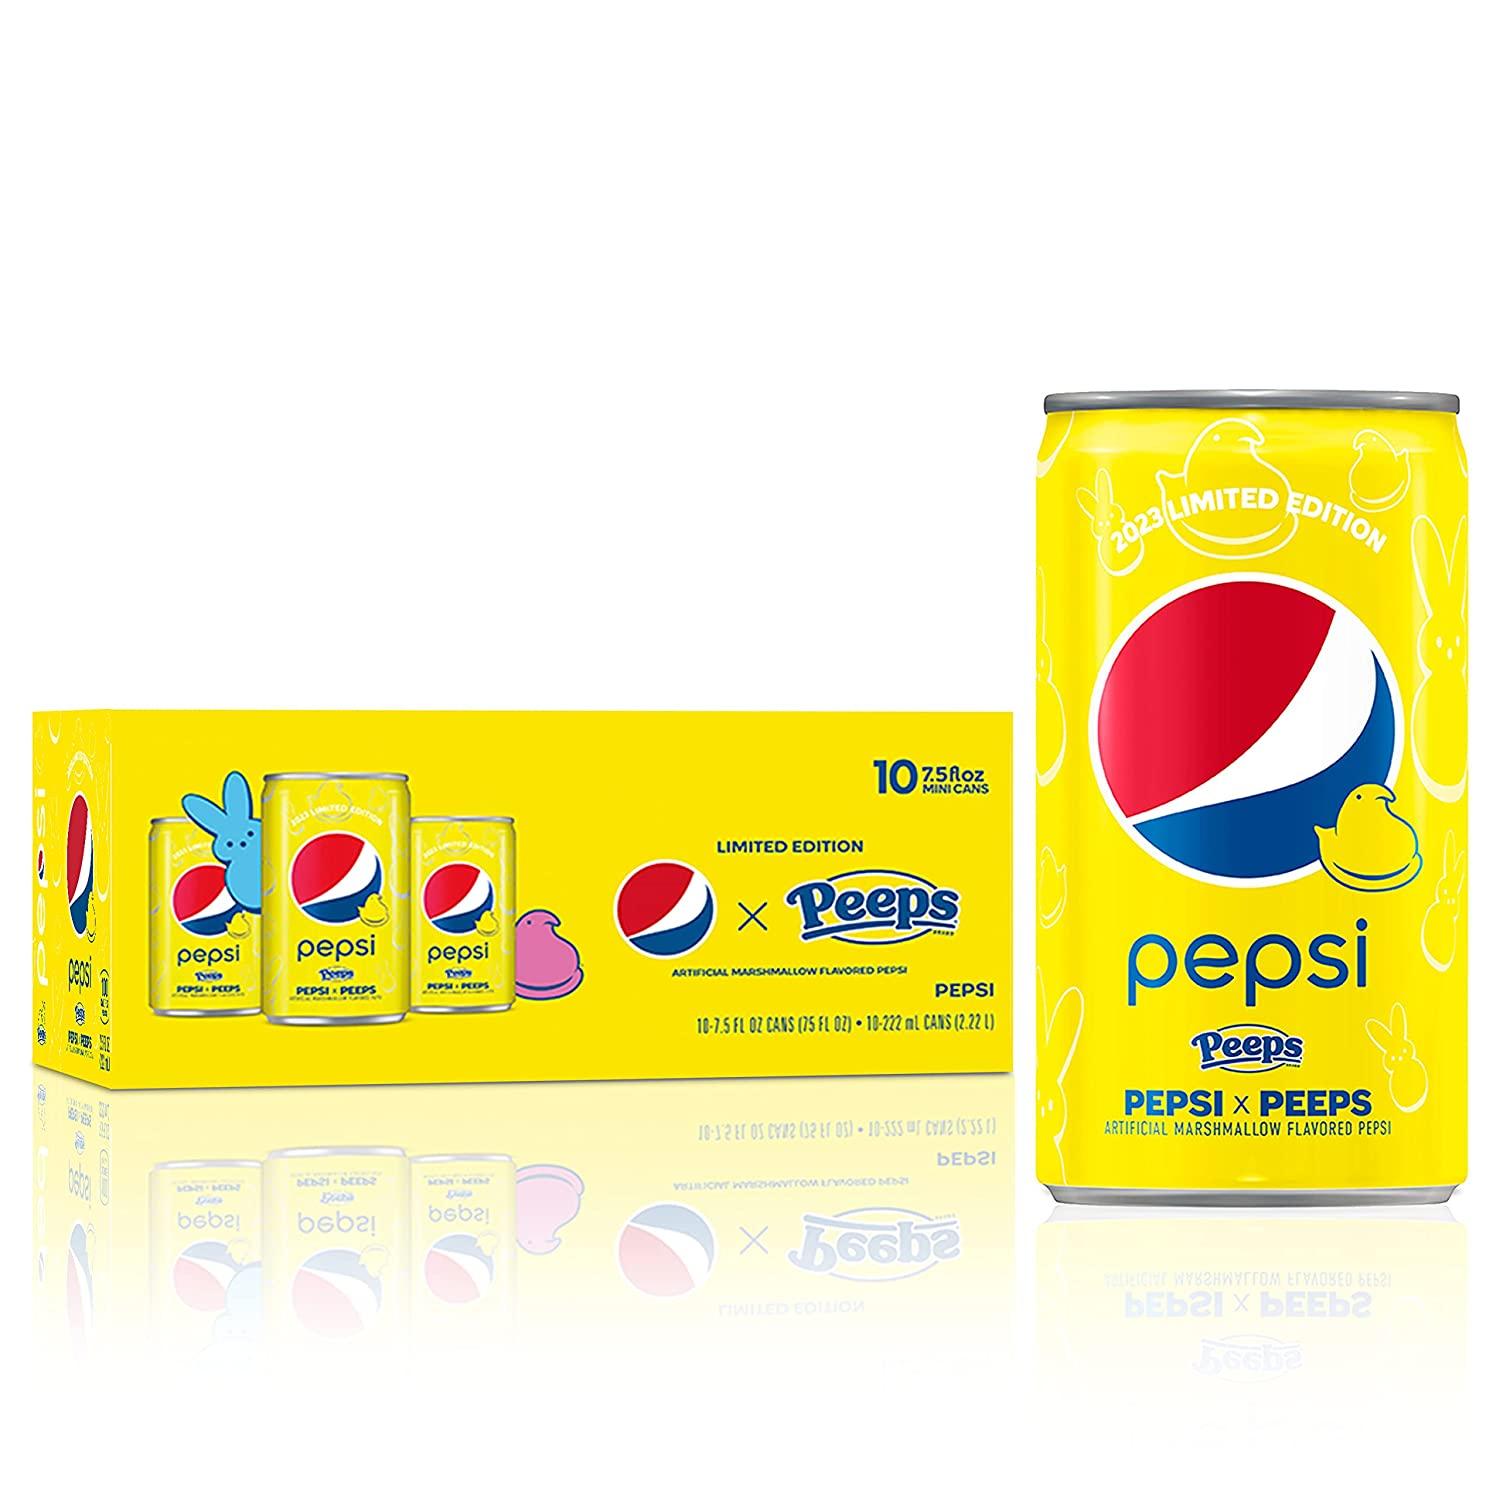 Pepsi x Peeps Soda Mini Cans 10 Pack for $4.88